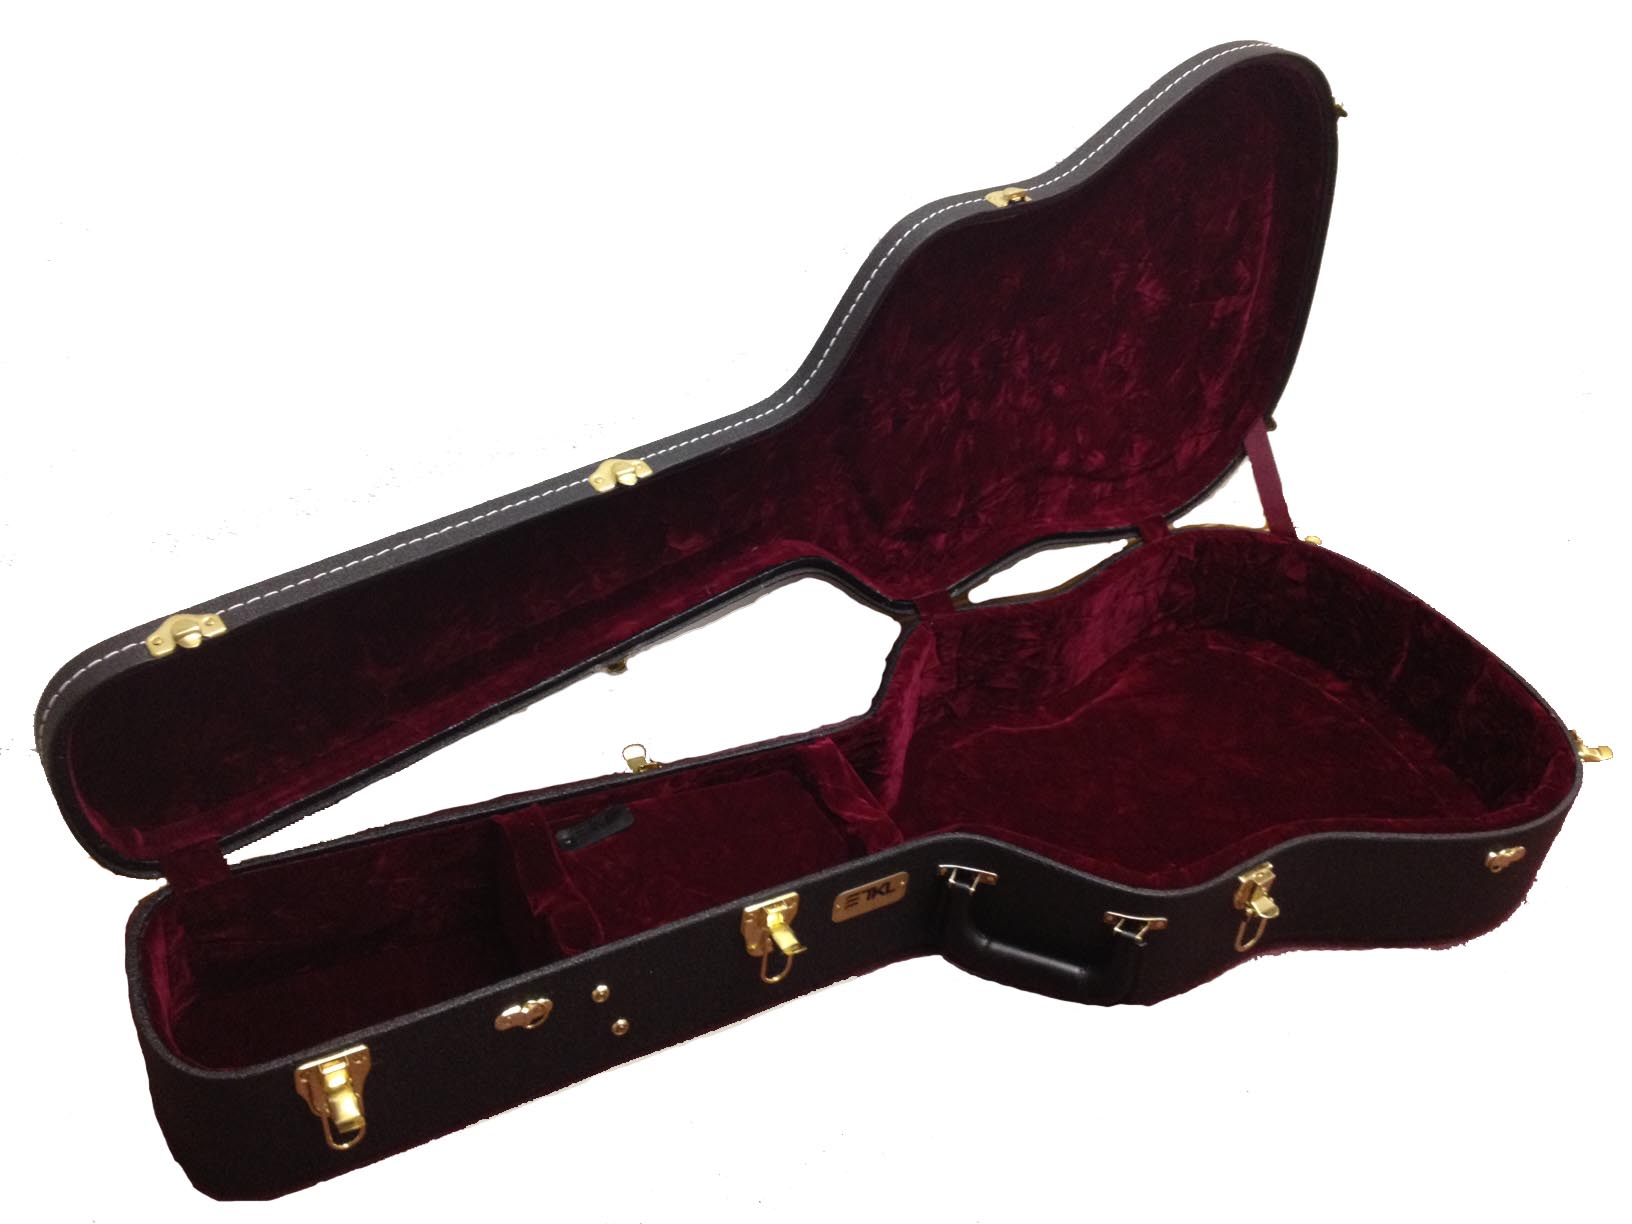 Guitar Cases for Acoustic & Electric Guitars